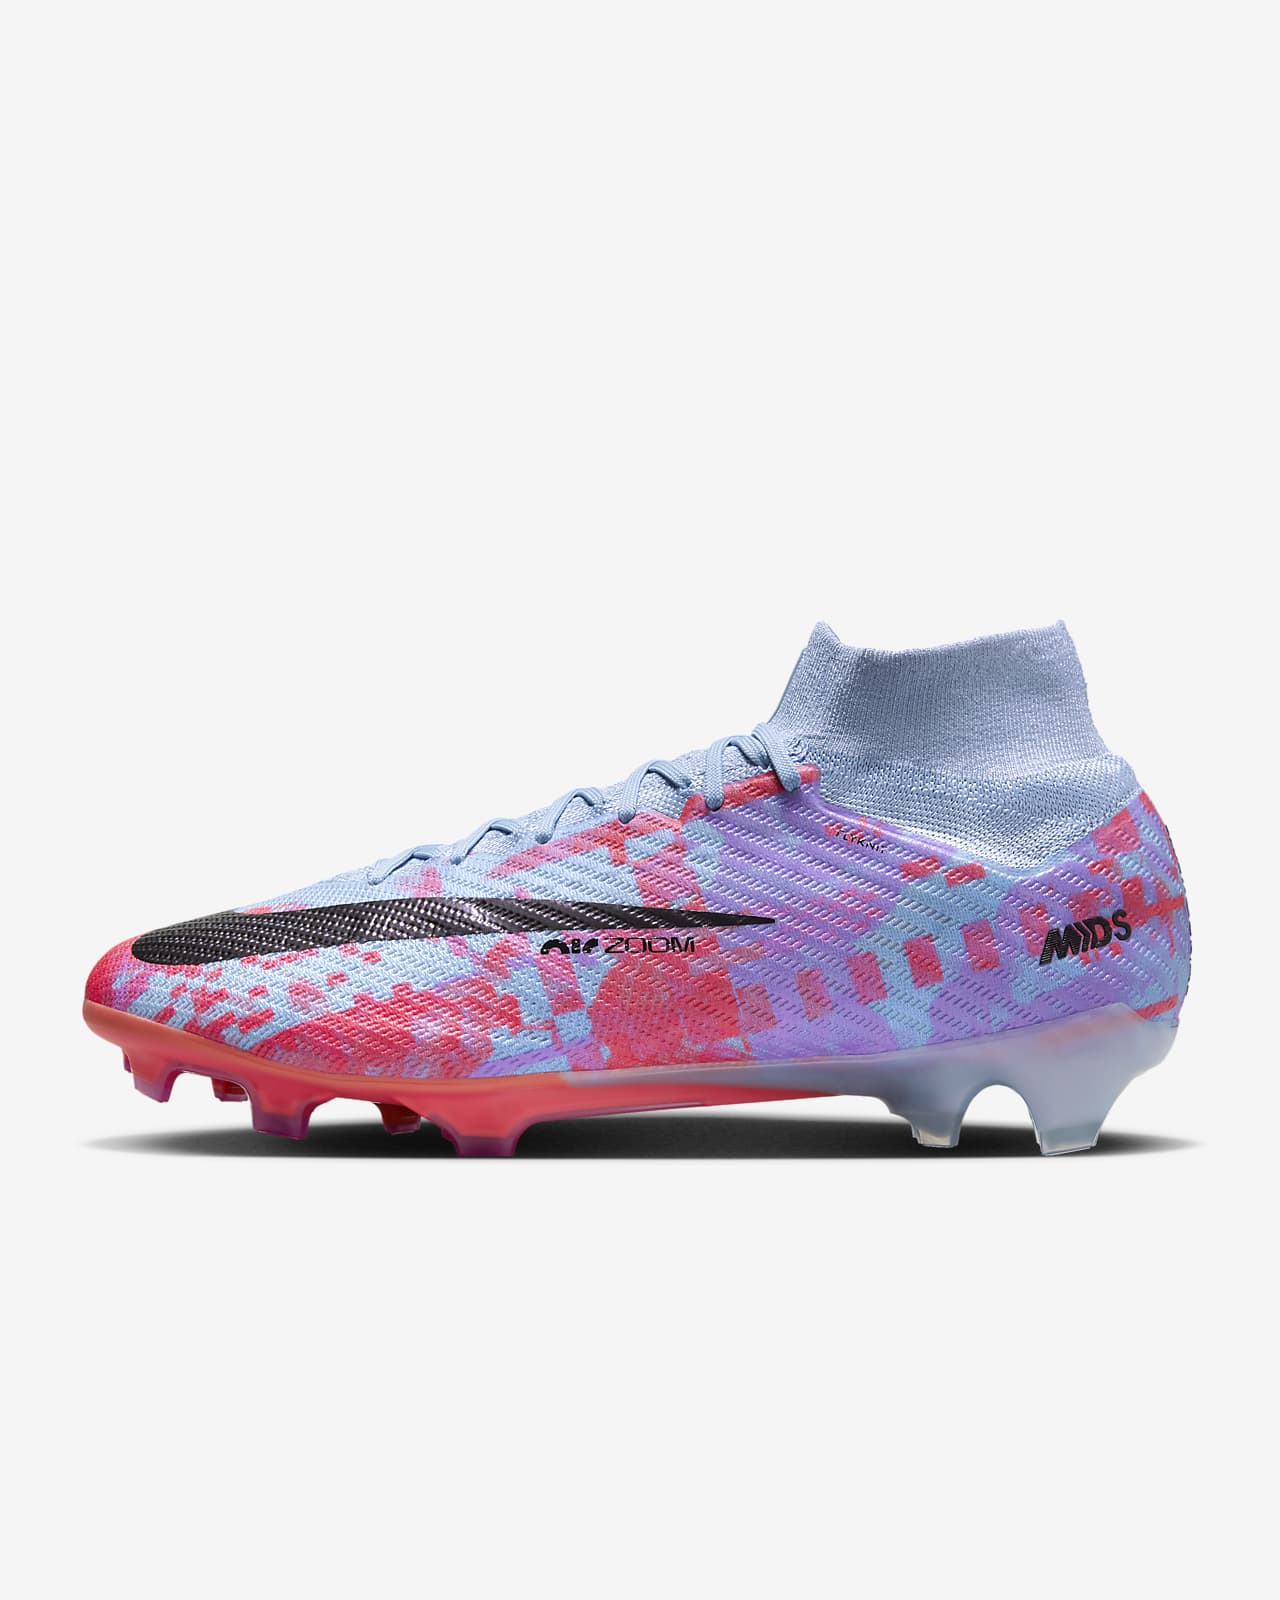 Nike Zoom Mercurial Dream Speed Superfly 9 Elite FG Firm-Ground Football Boot